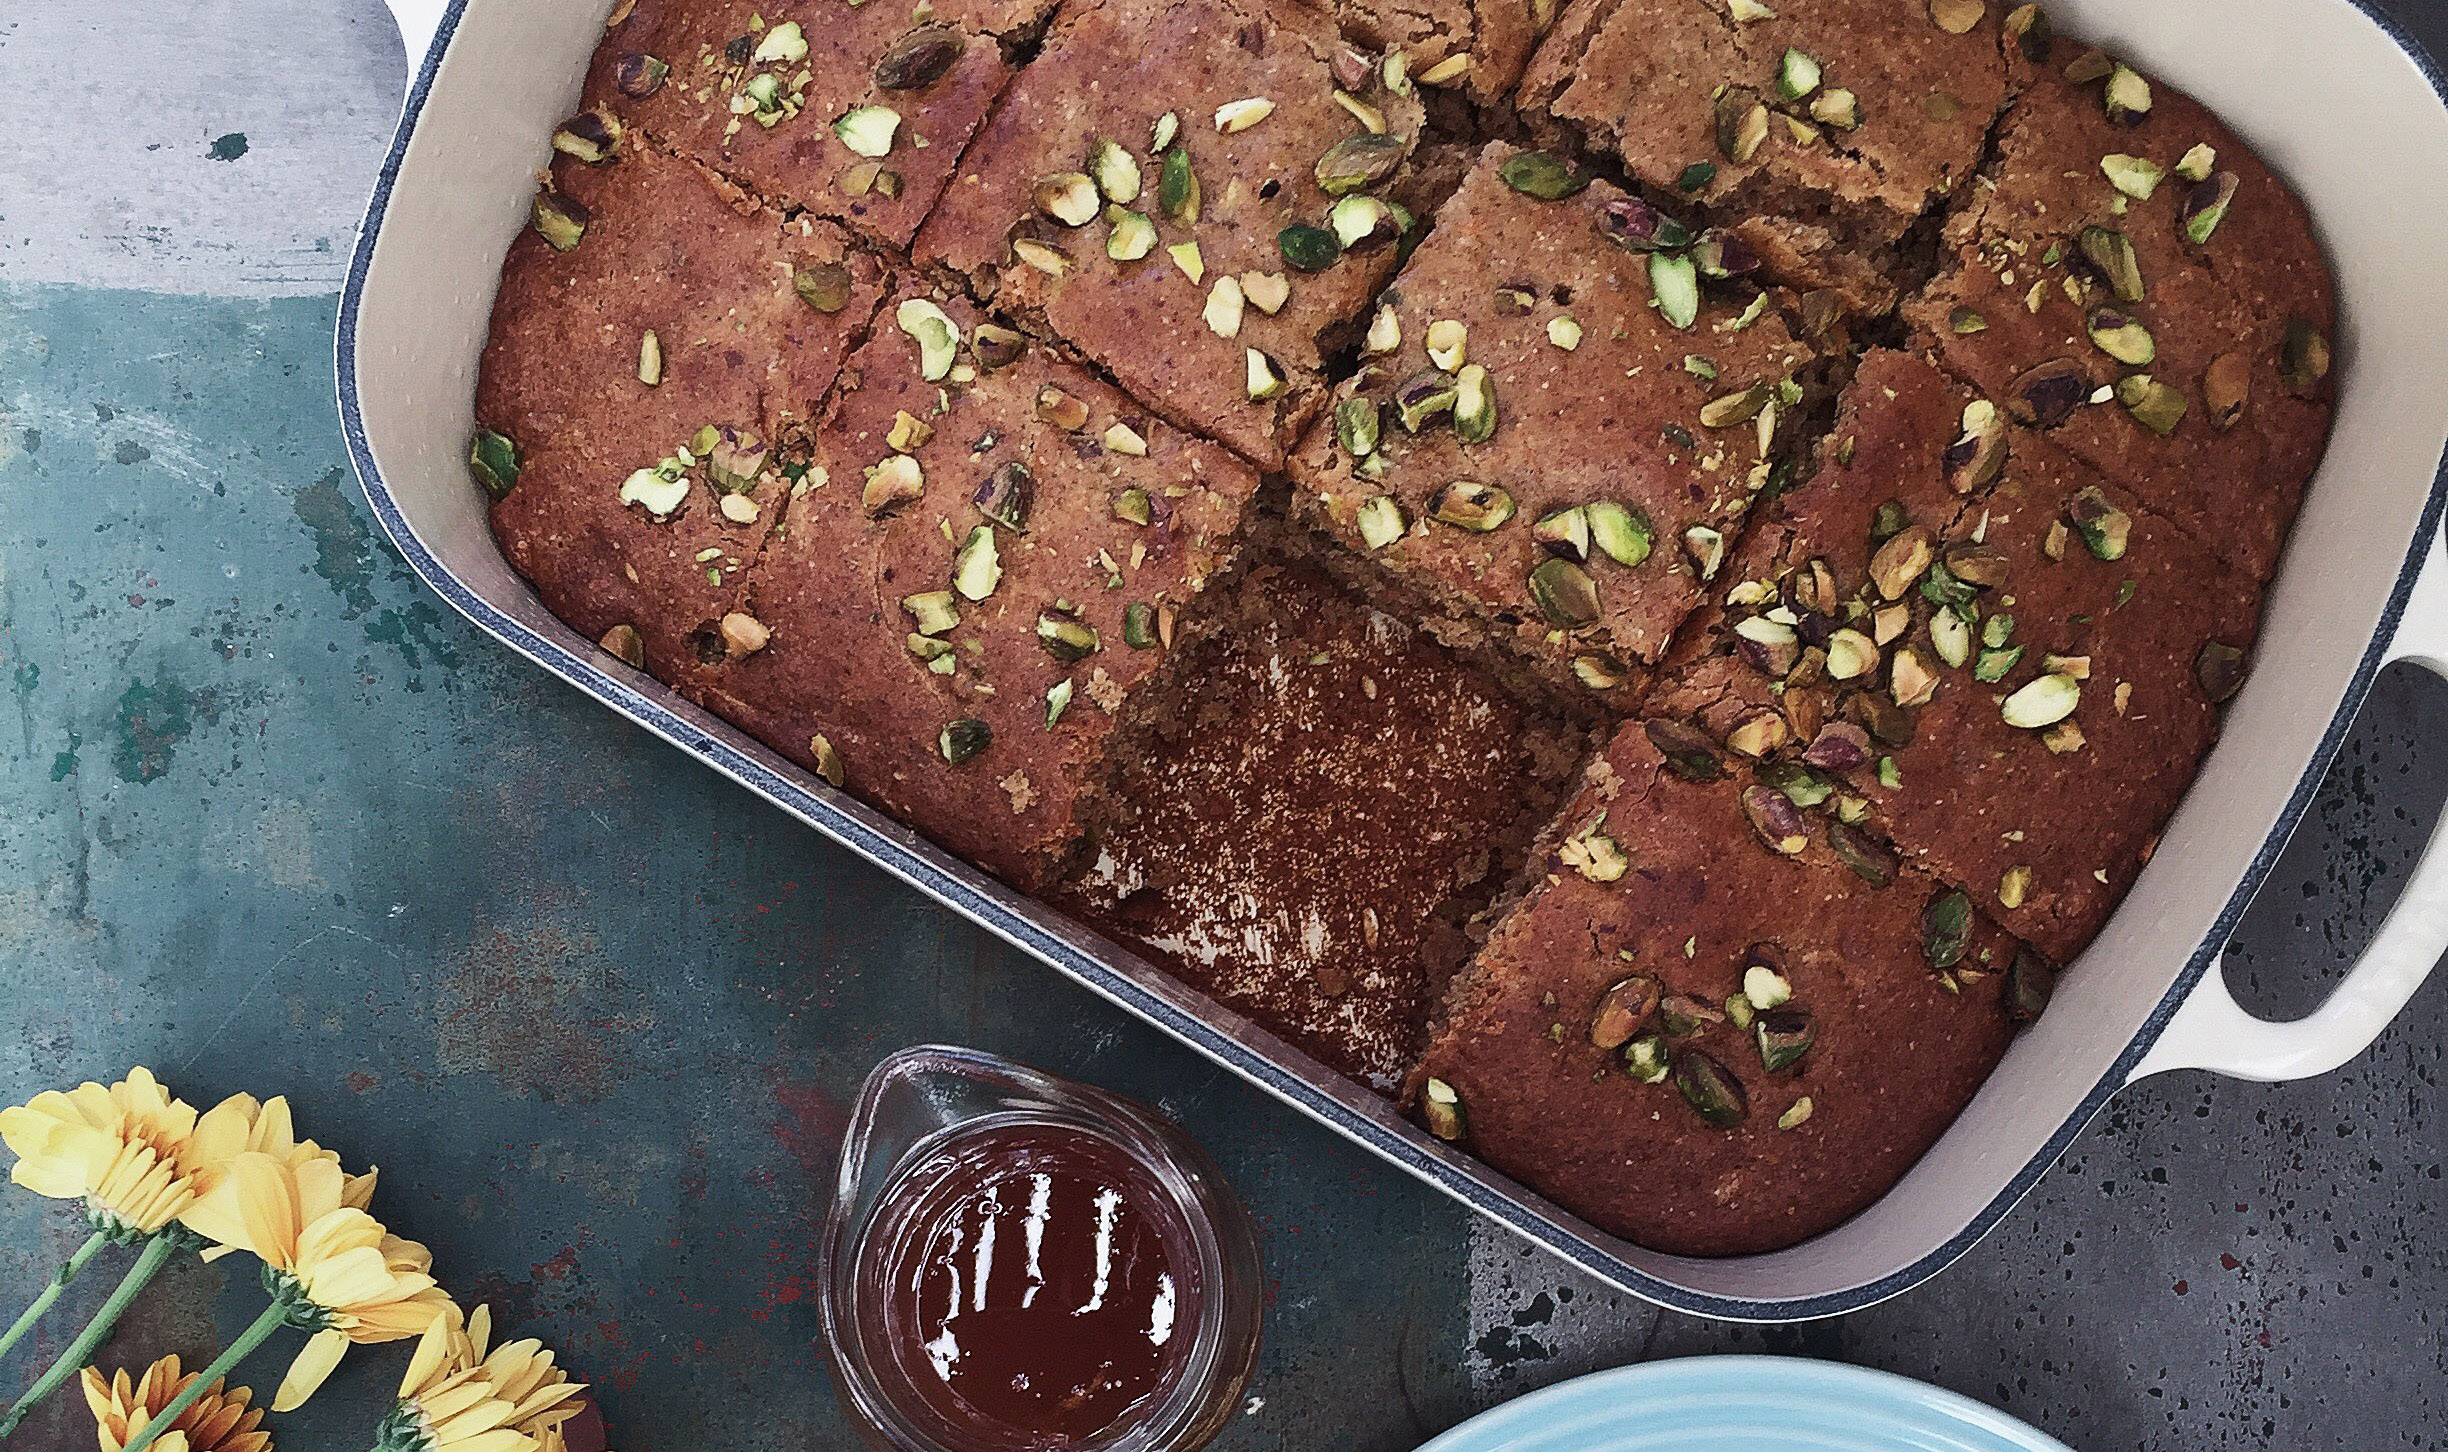 Pistachio Carrot Cake Squares with Orange Syrup